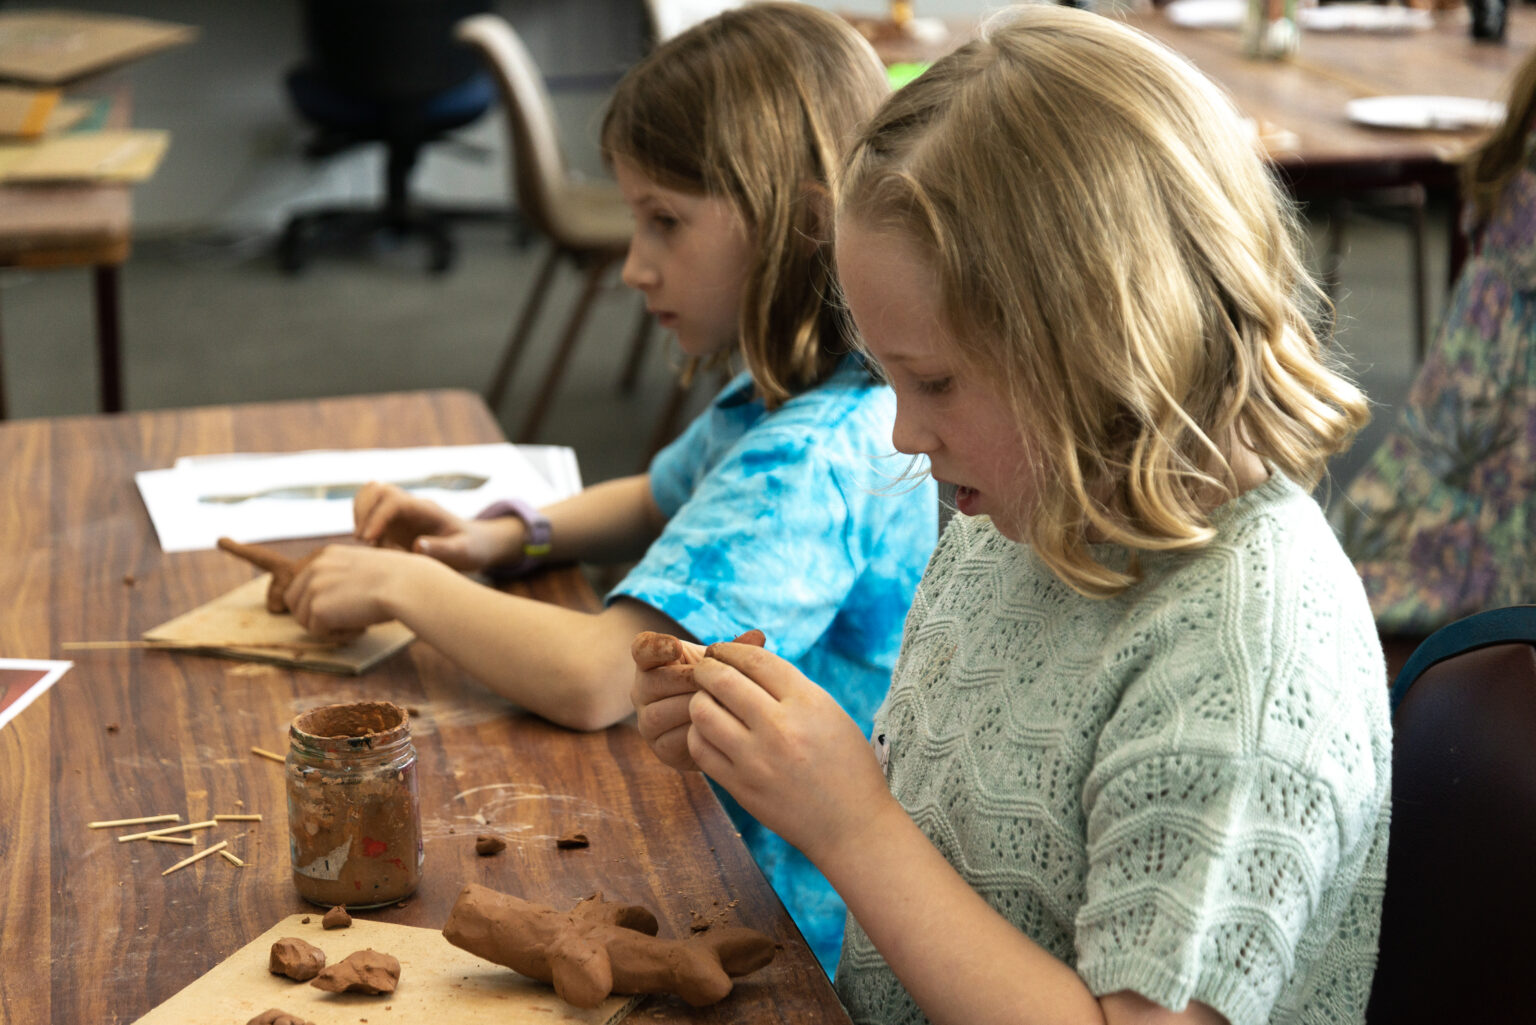 We see two kids sitting at a wooden table concentrating on creating clay animals.